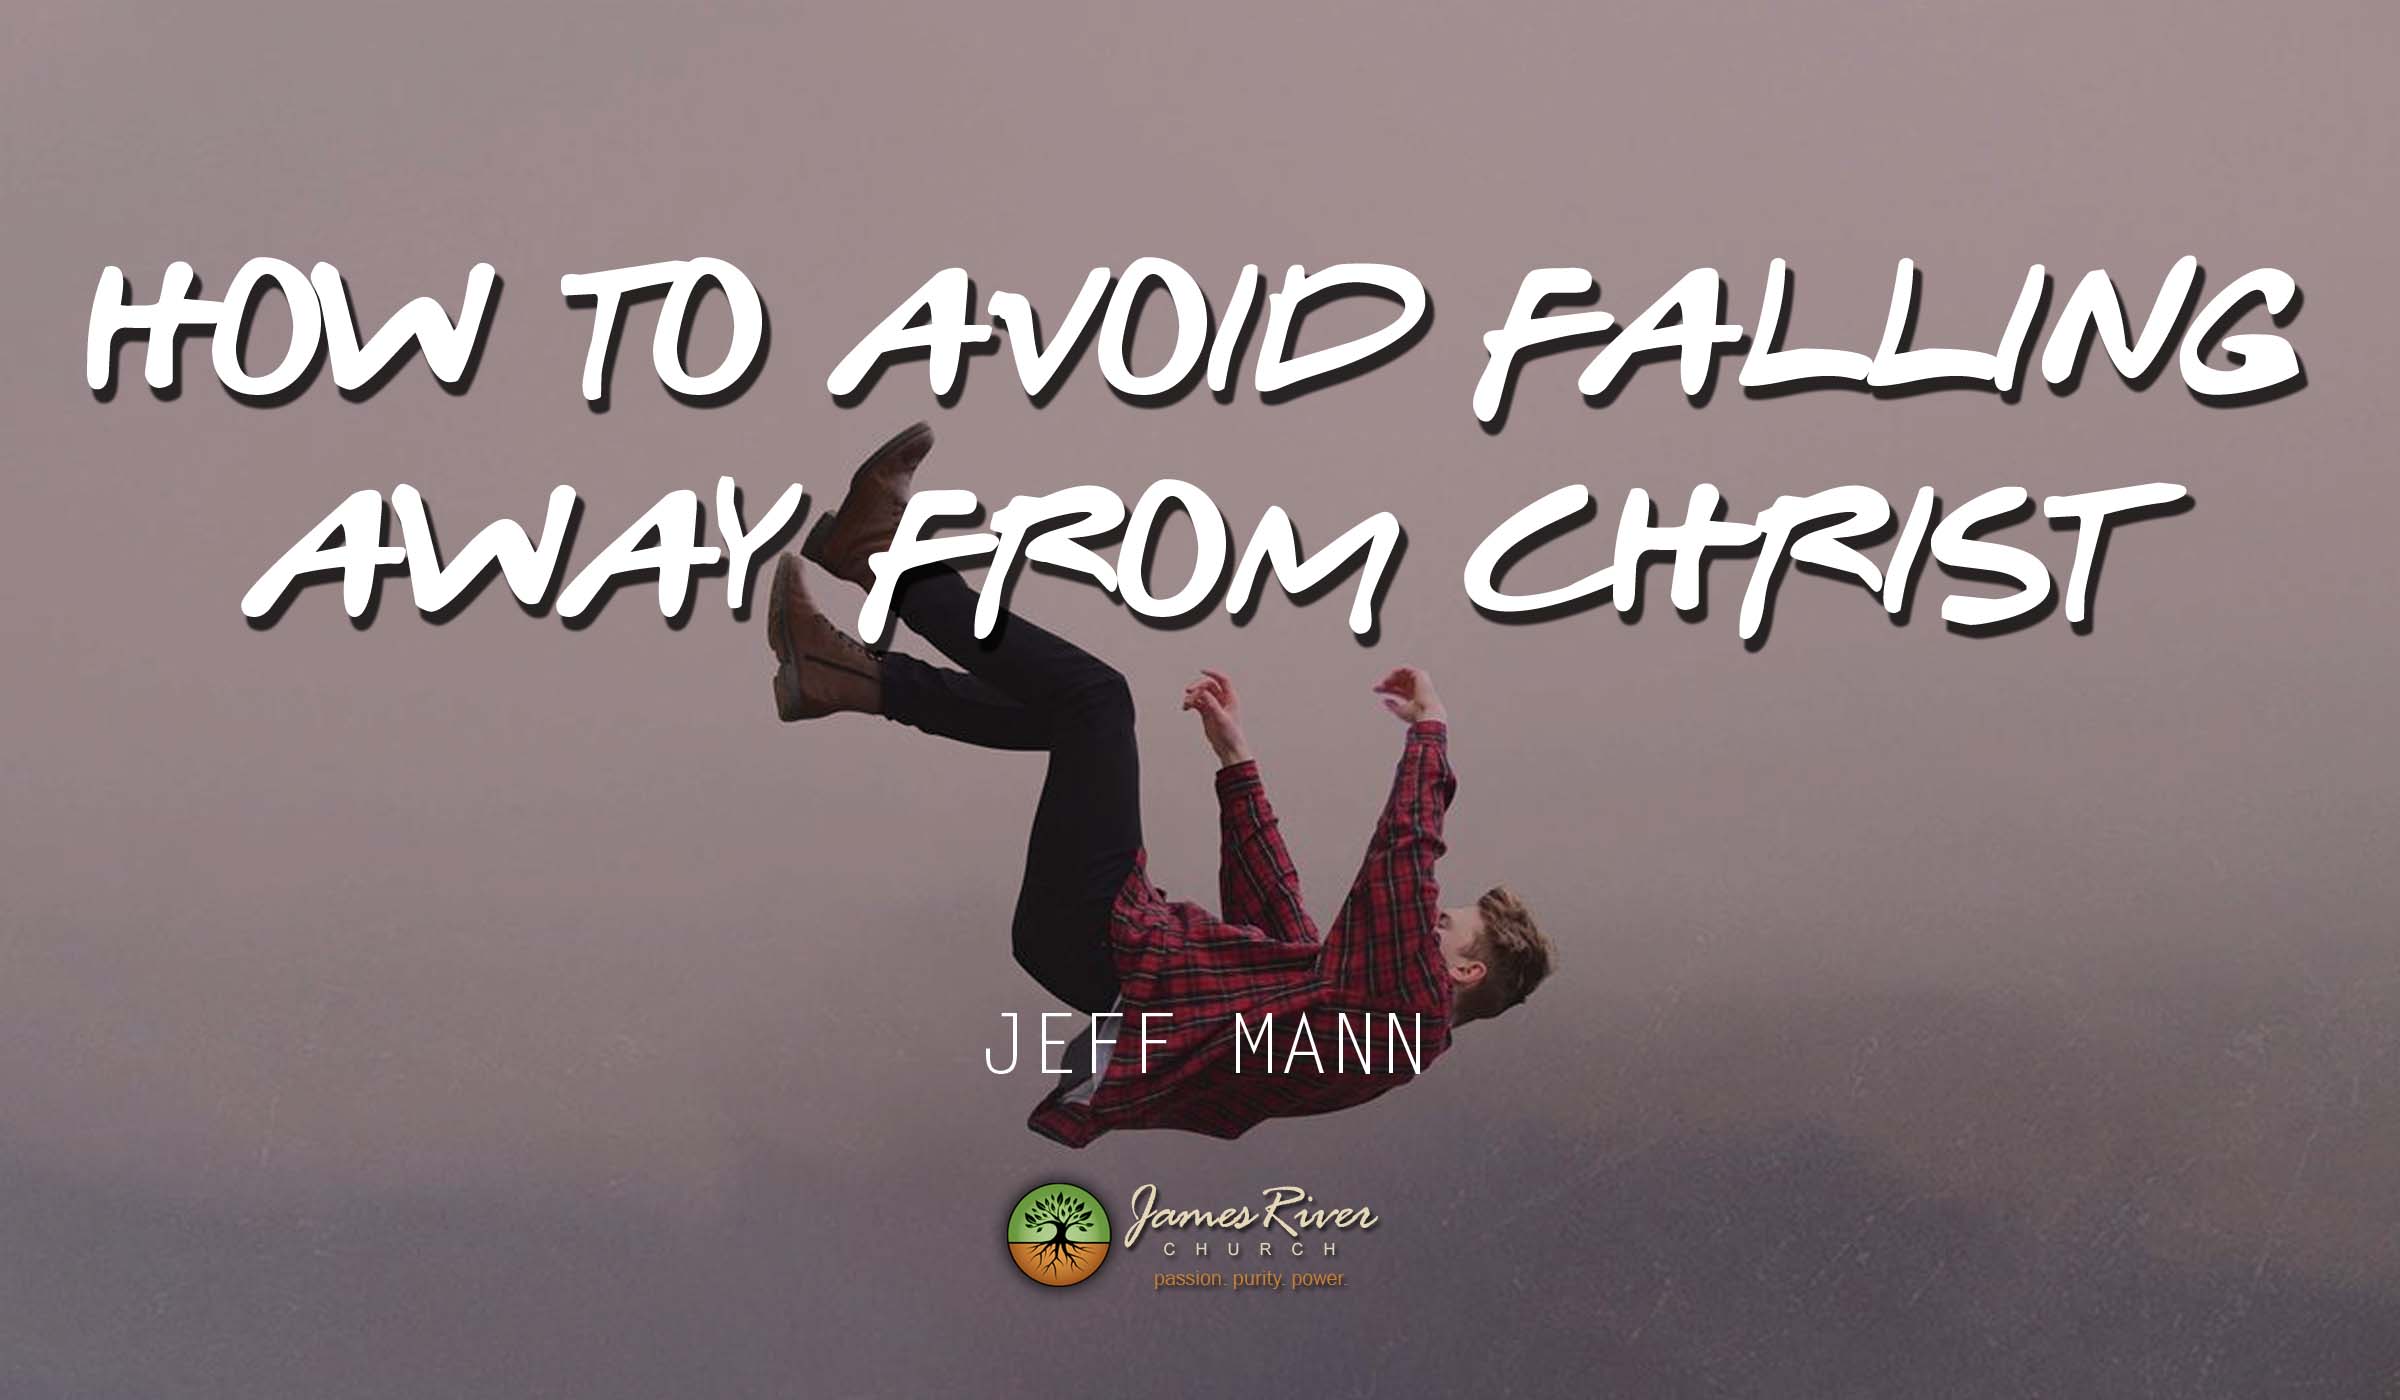 How to Avoid Falling Away from Christ